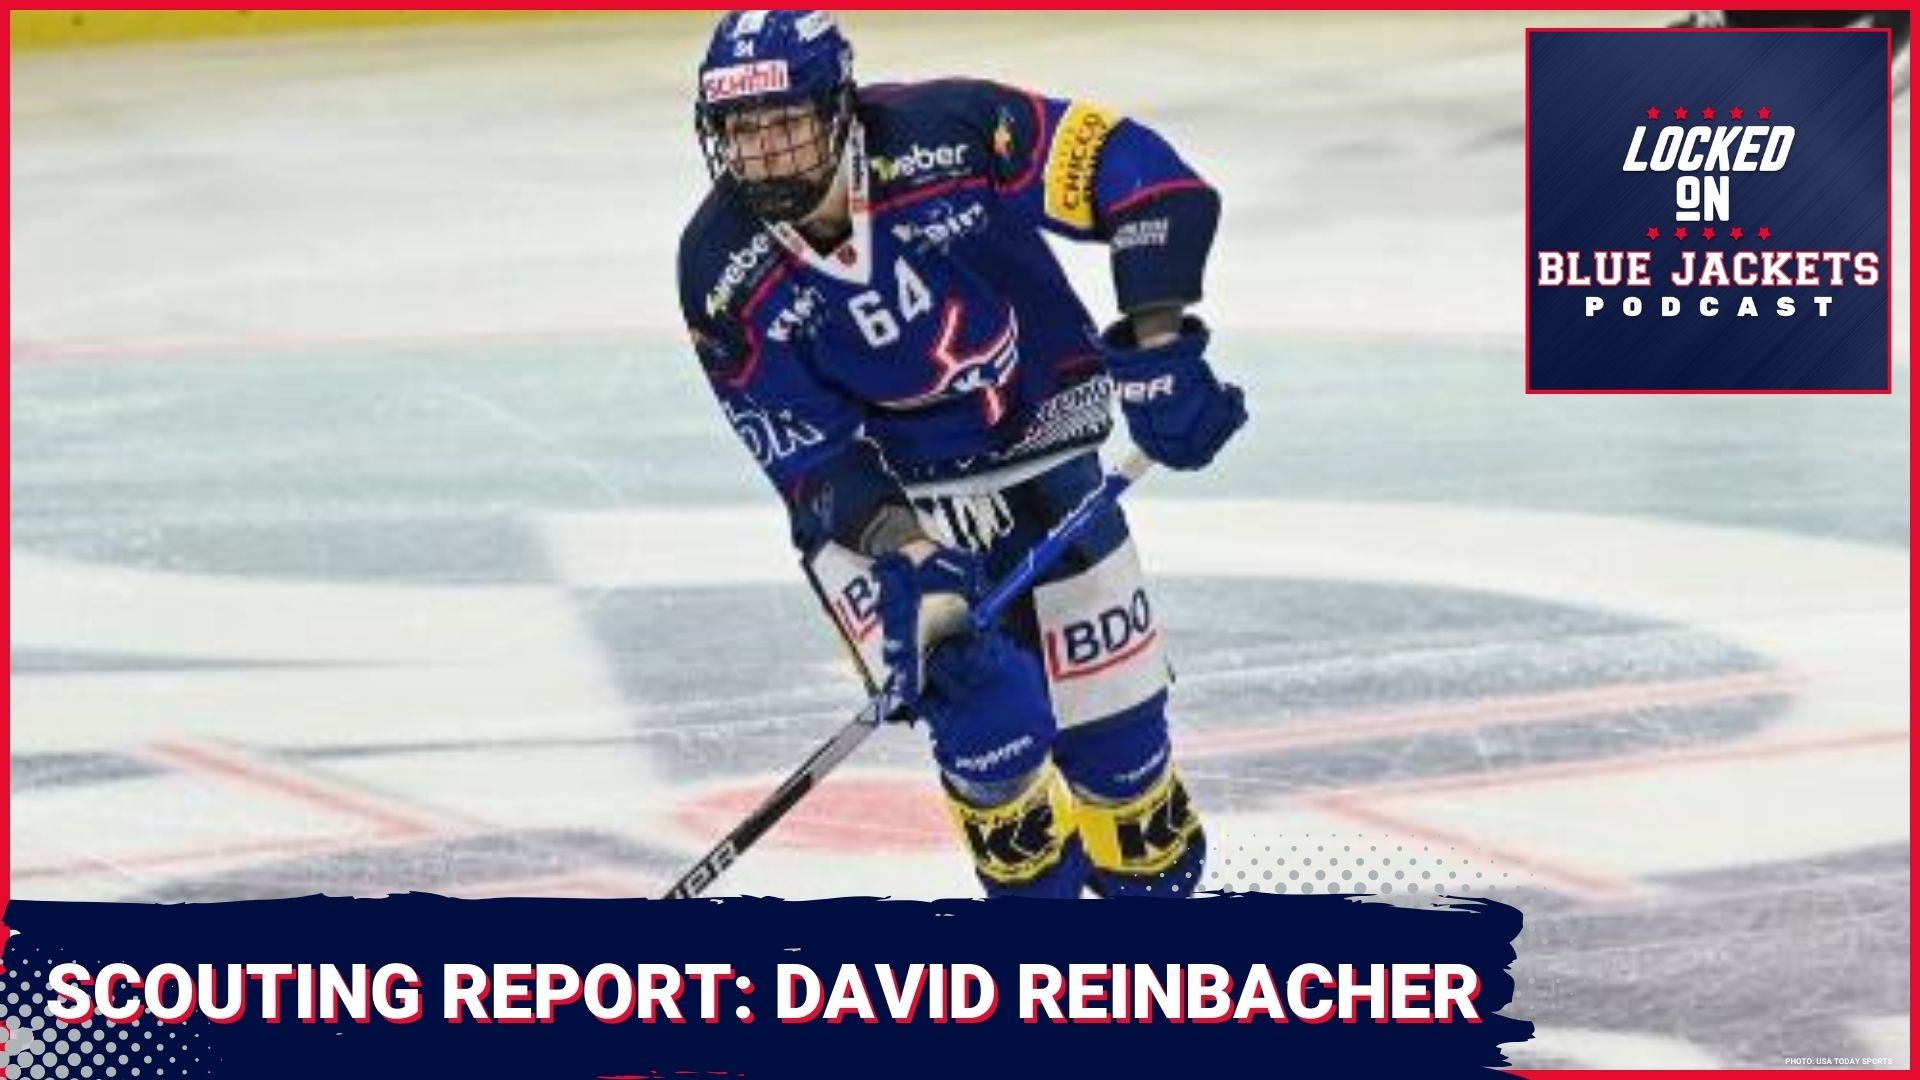 The Blue Jackets have approximately 700 defensive prospects, but could they add another in Austrian David Reinbacher?